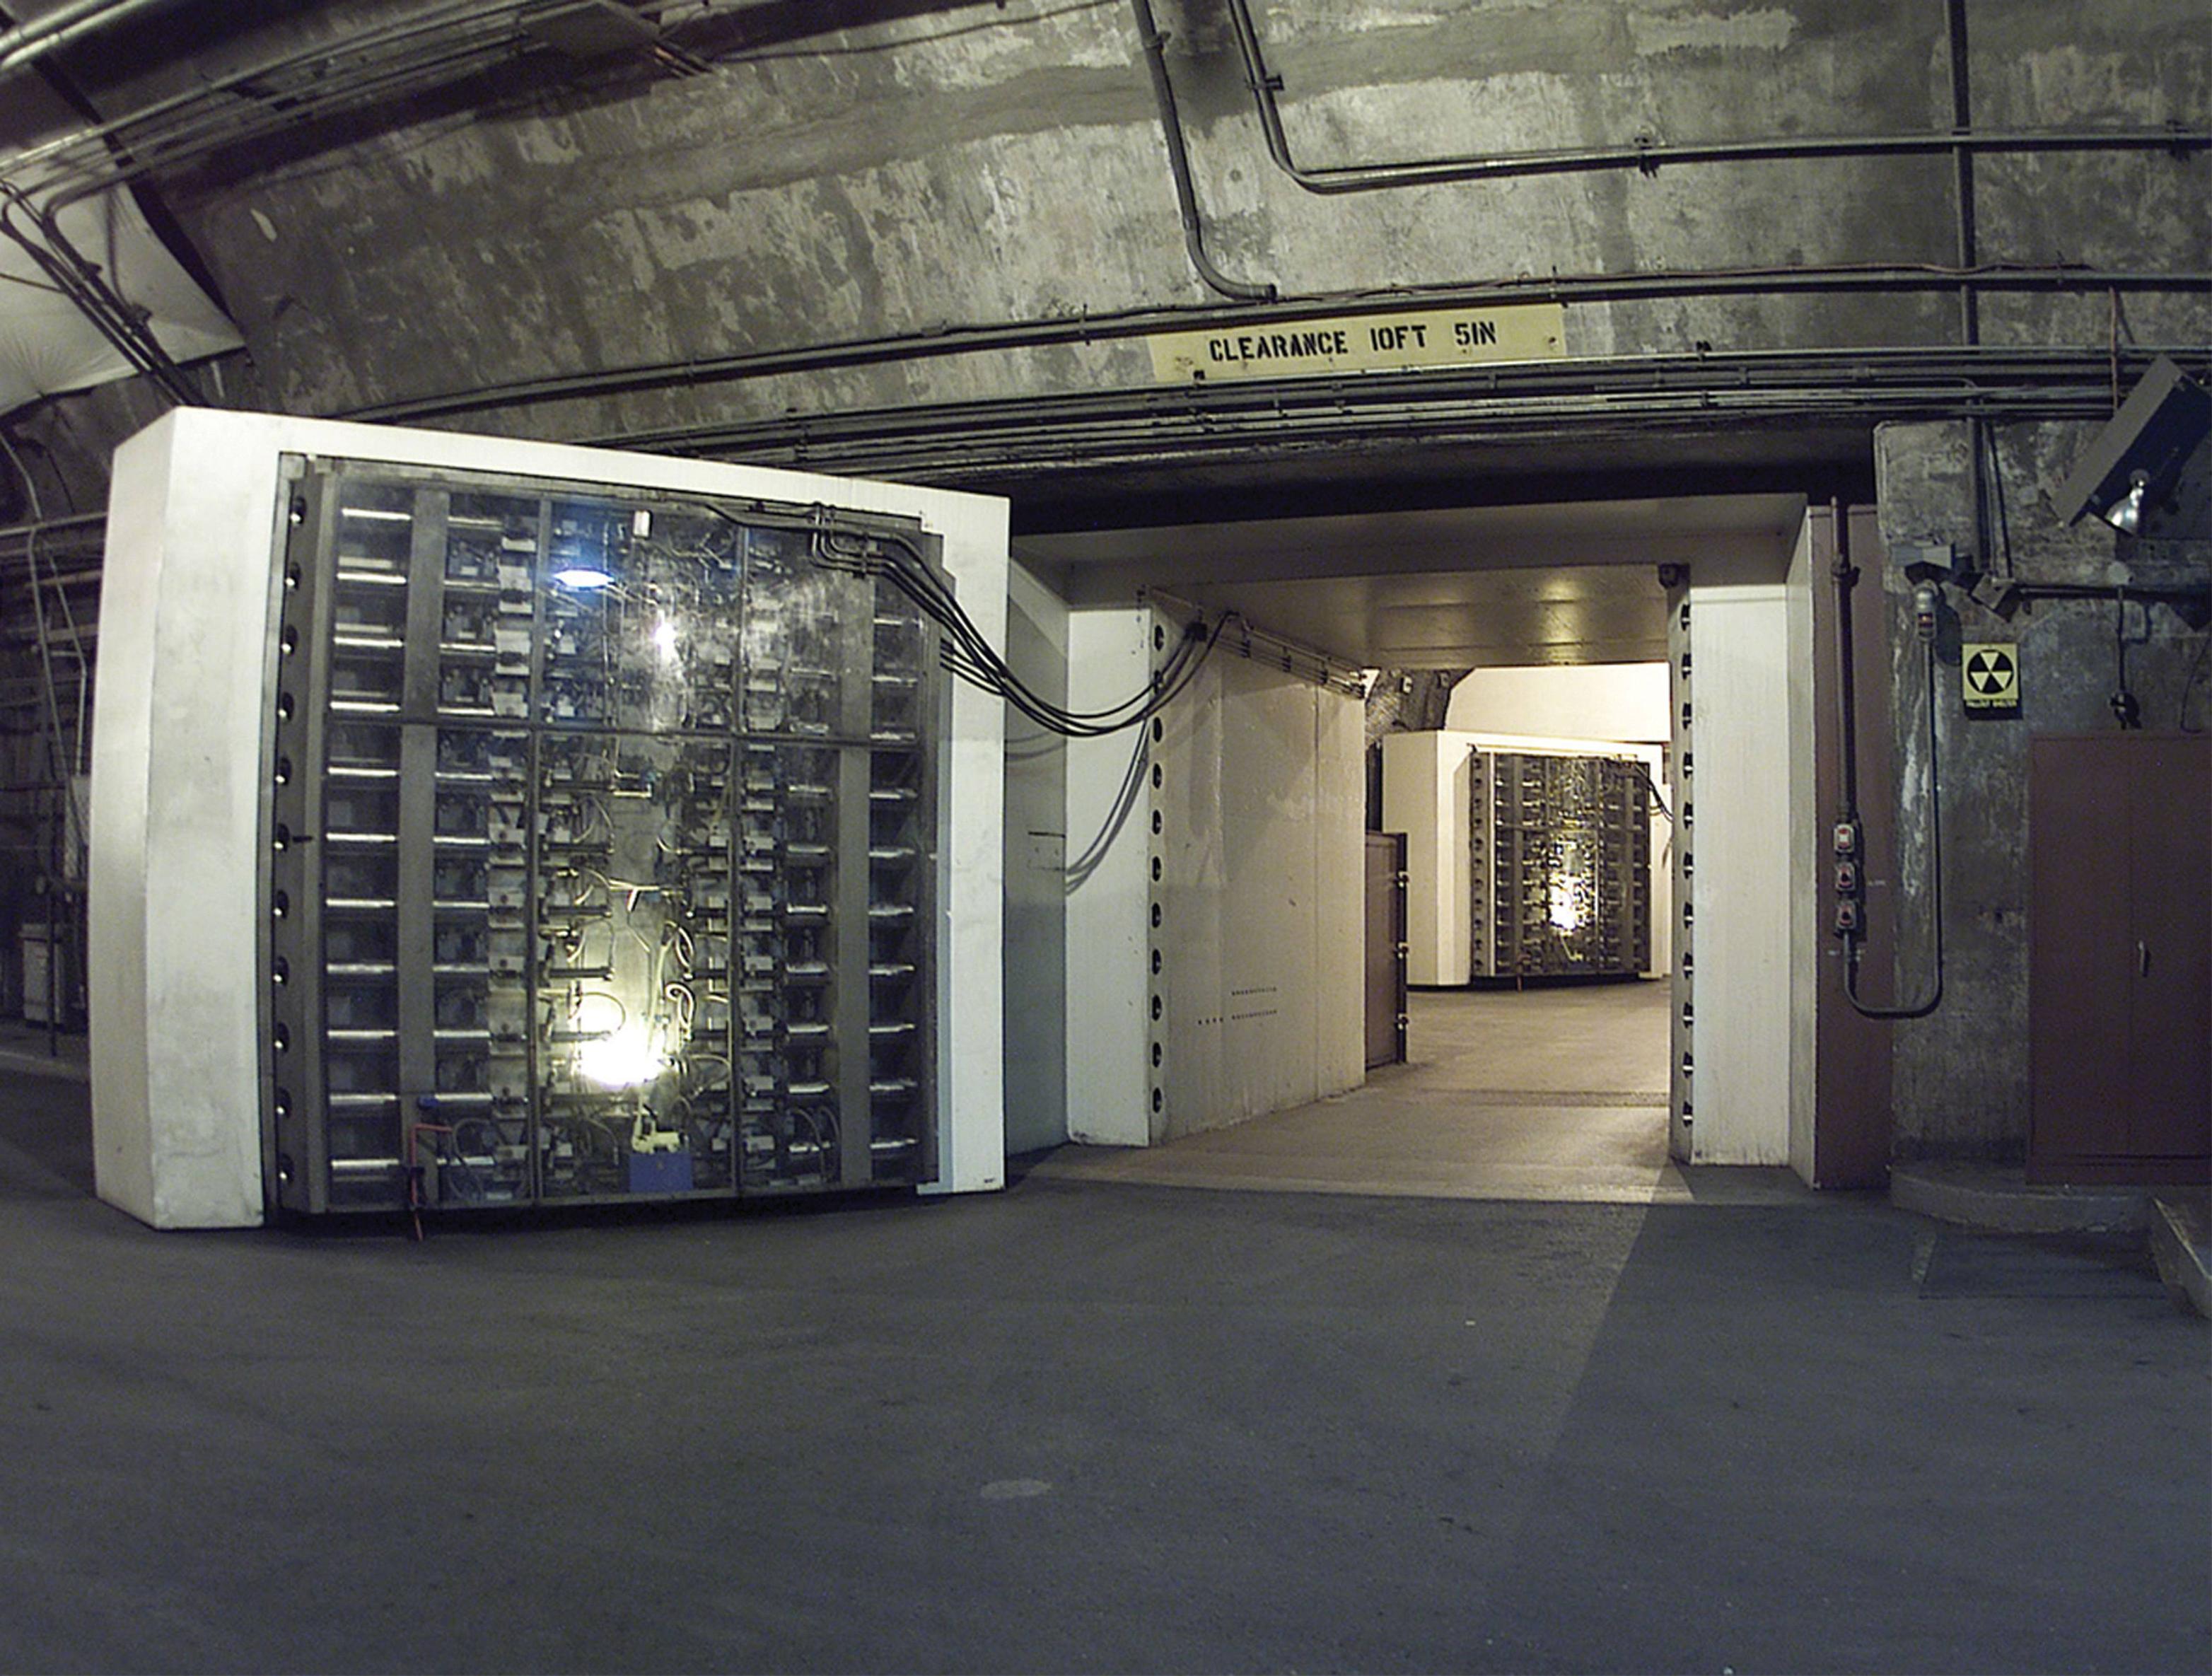 One of the blast doors at the NORAD Cheyenne Mountain complex